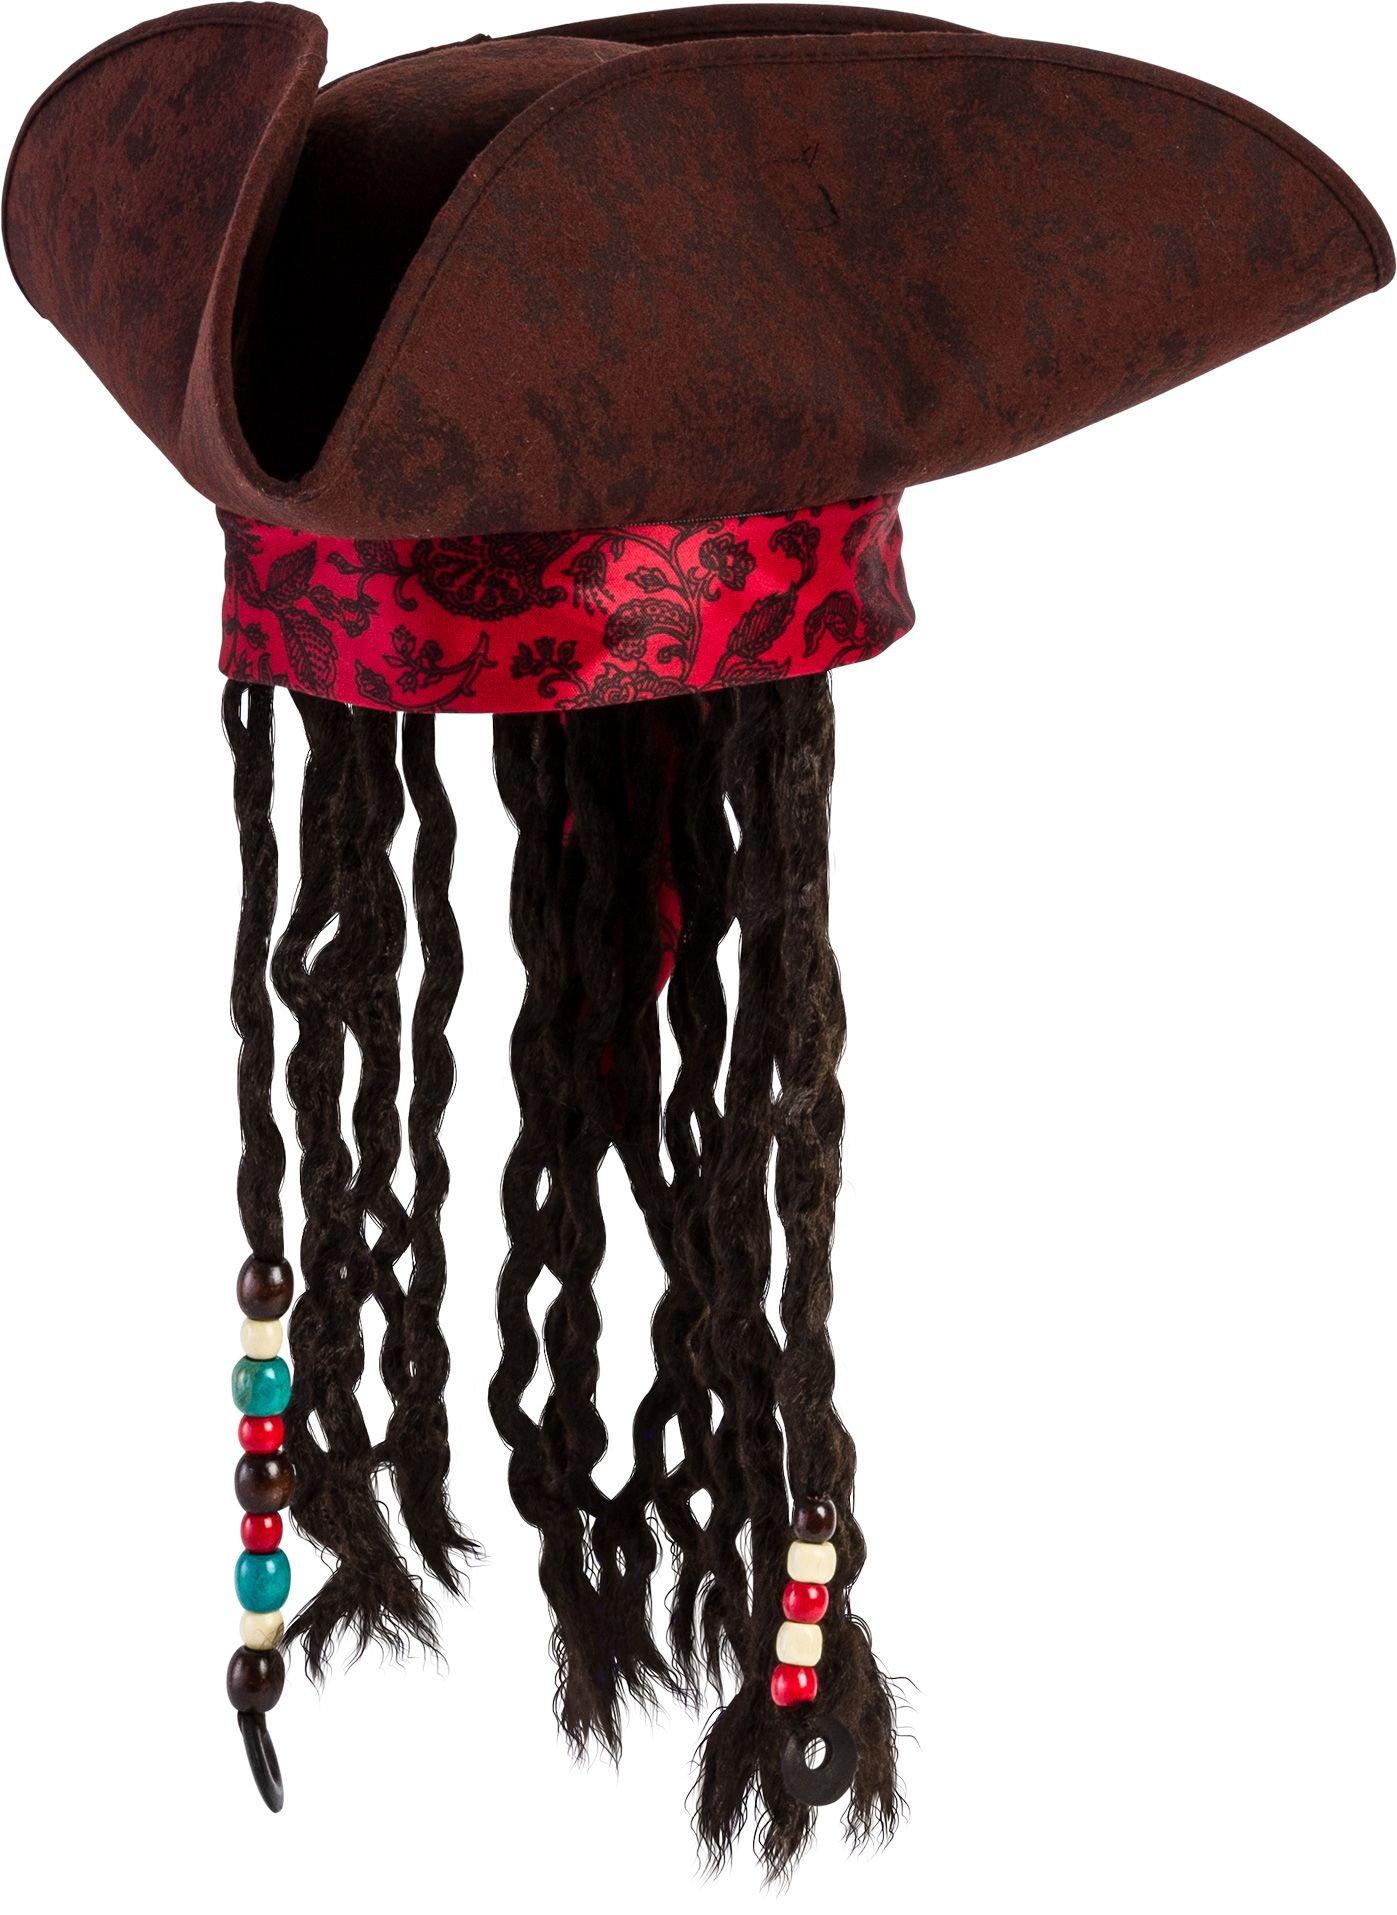 halloween costume for men adult pirate captain jack sparrow wigs hat  pirates of the caribbean cosplay